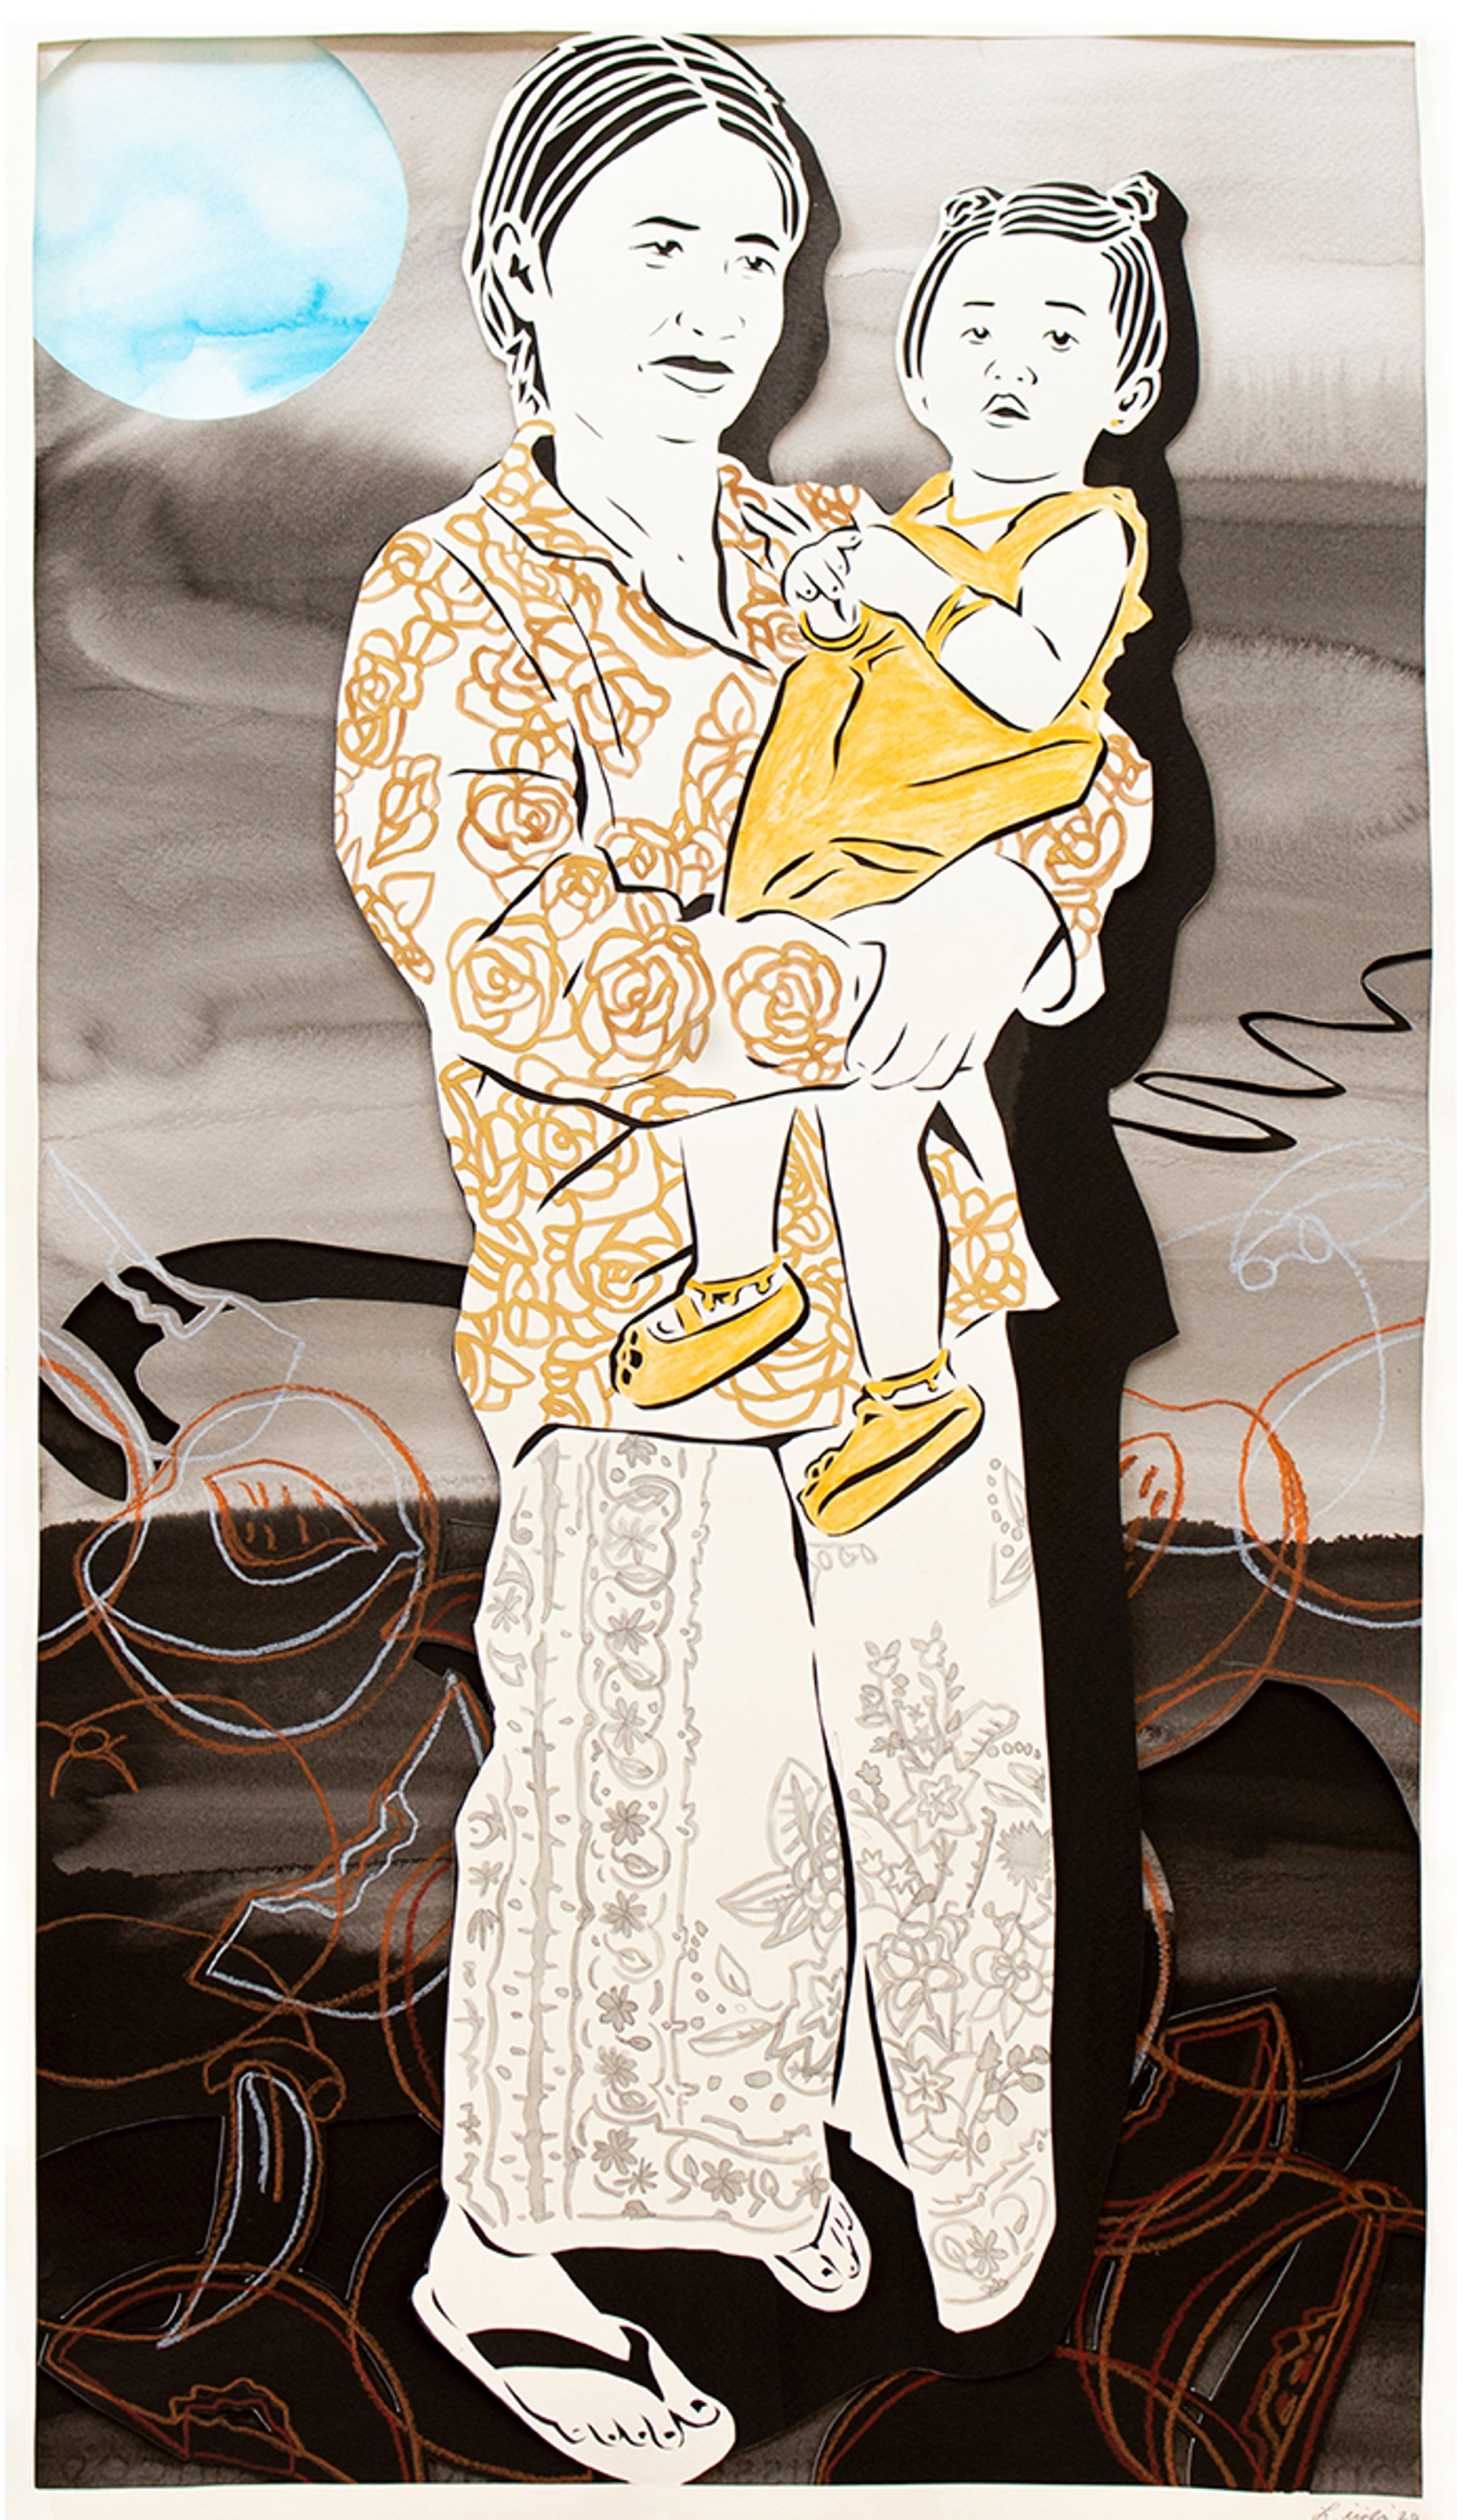 26. Cute: The Appearance of the Rice Phone Shaman’s Wife and Momotaro by Lauren Iida